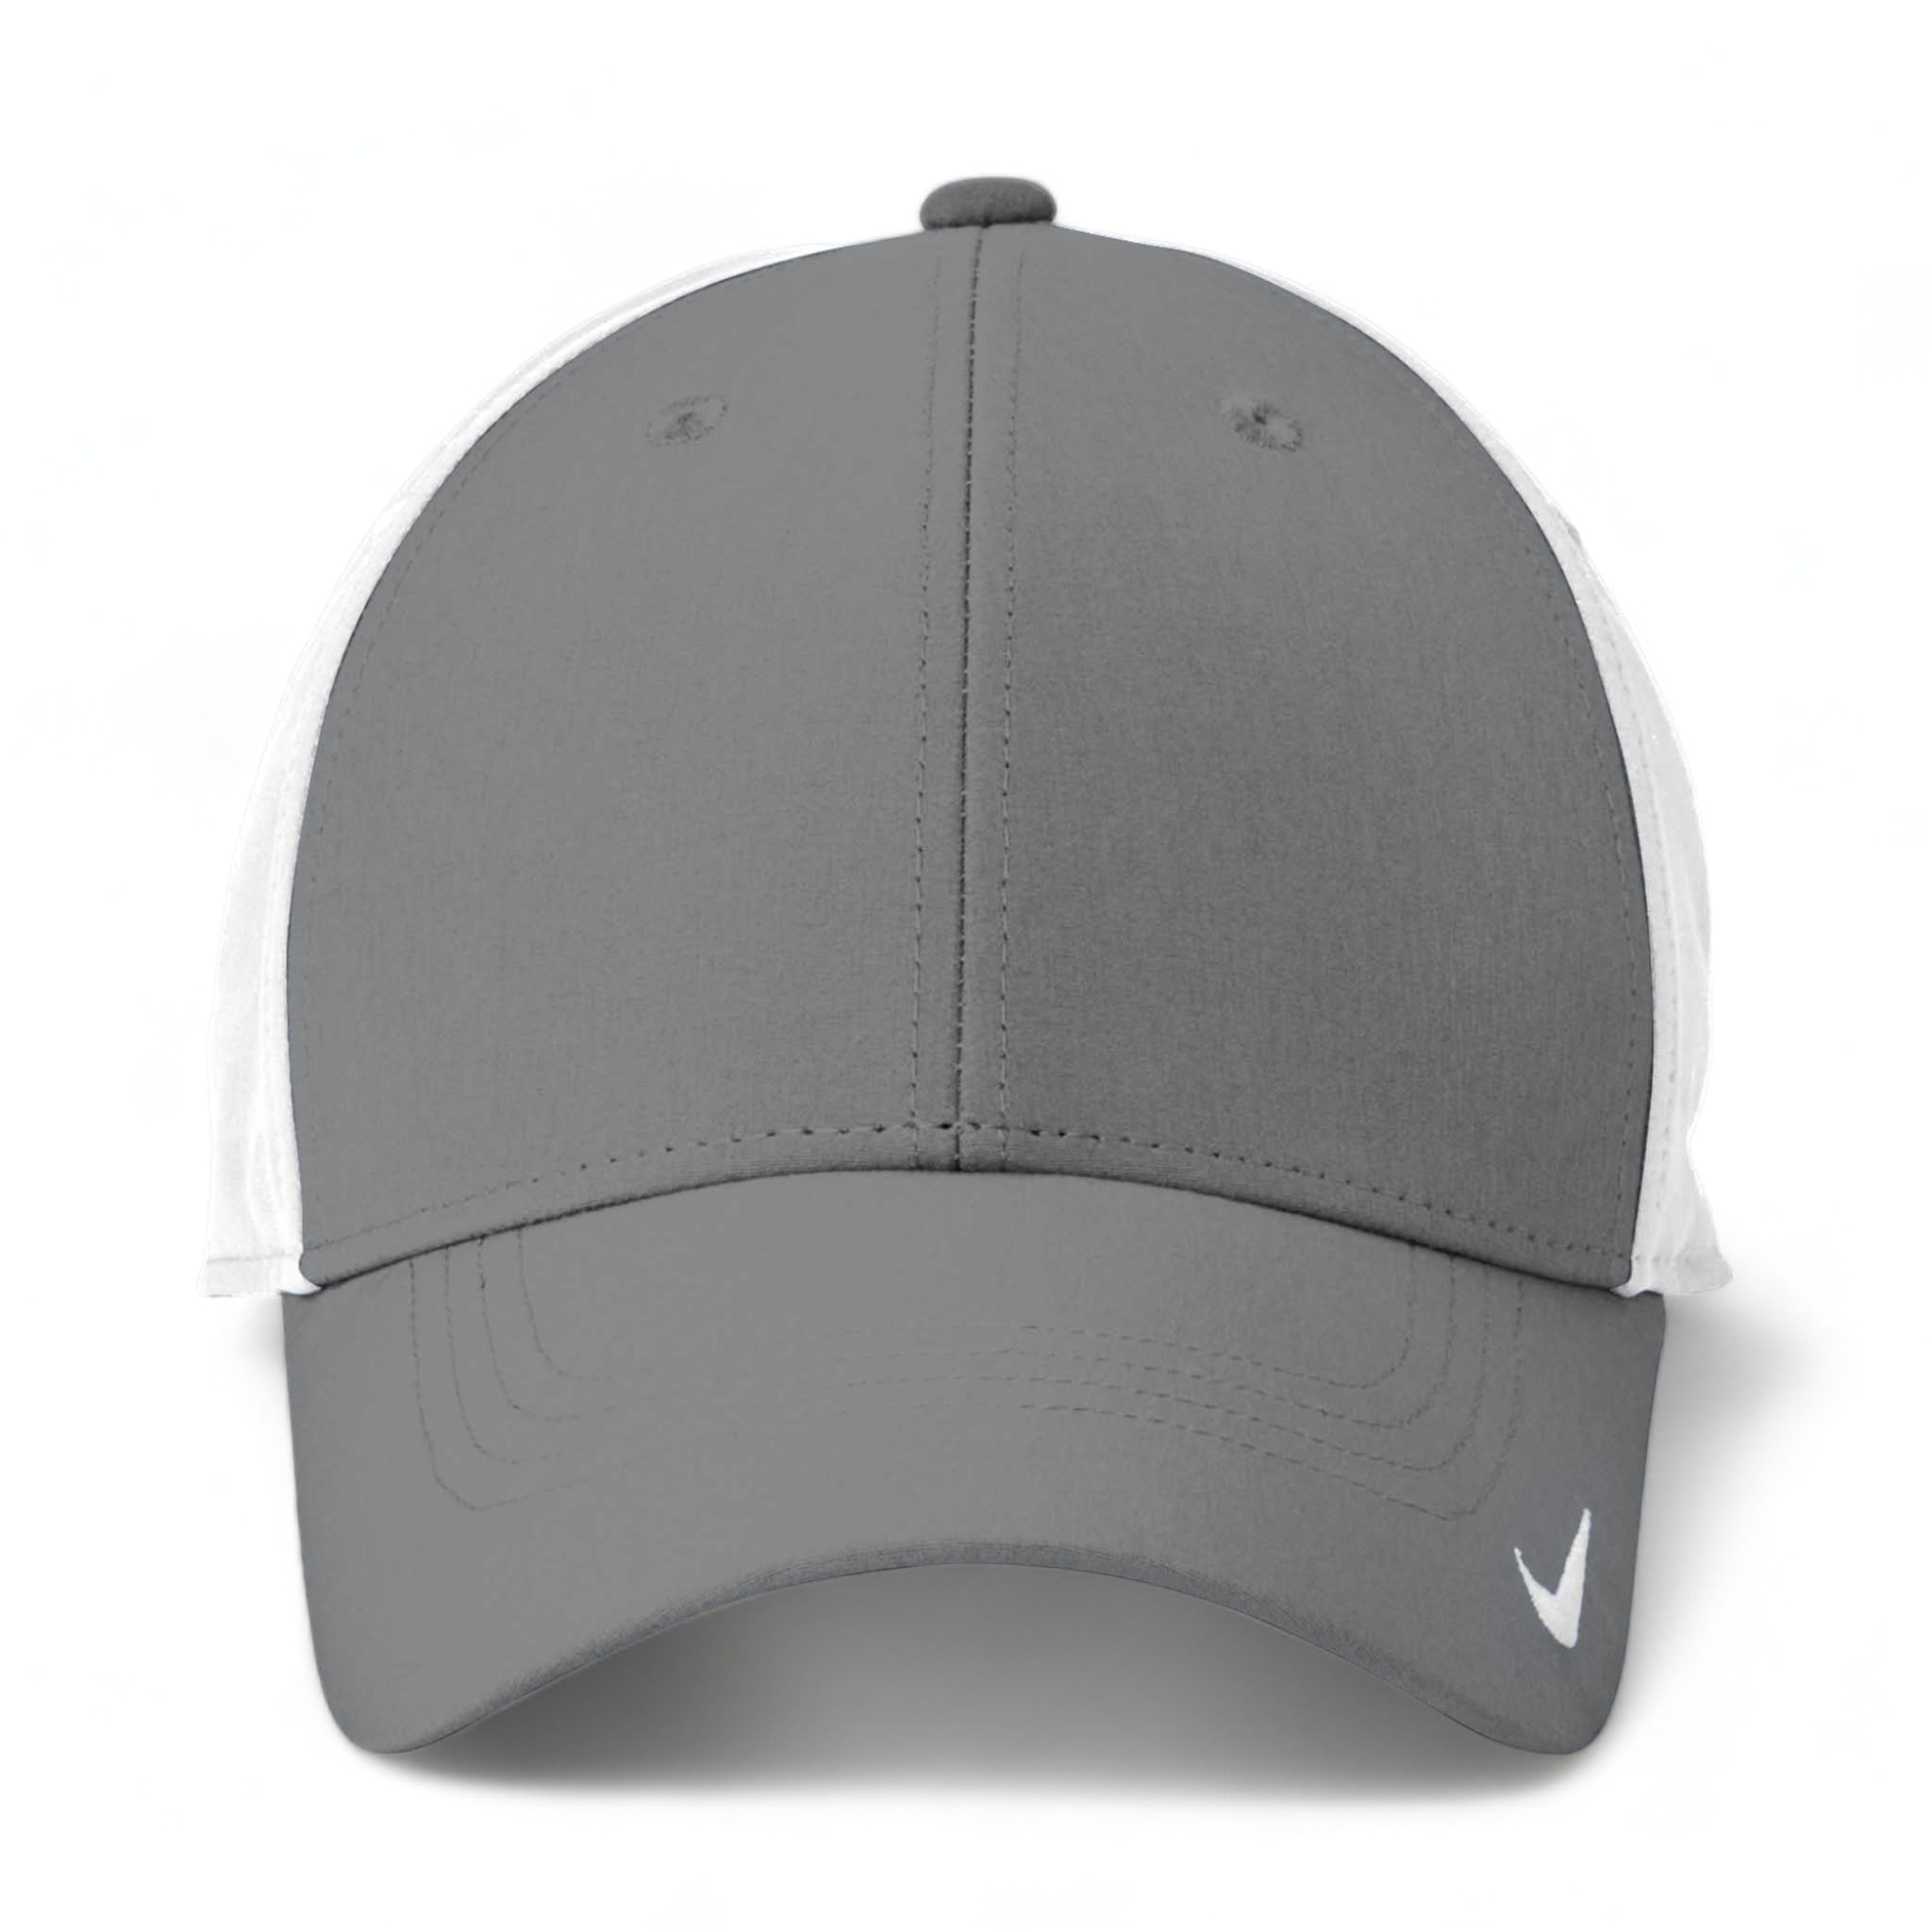 Front view of Nike NKFB6447 custom hat in dark grey and white